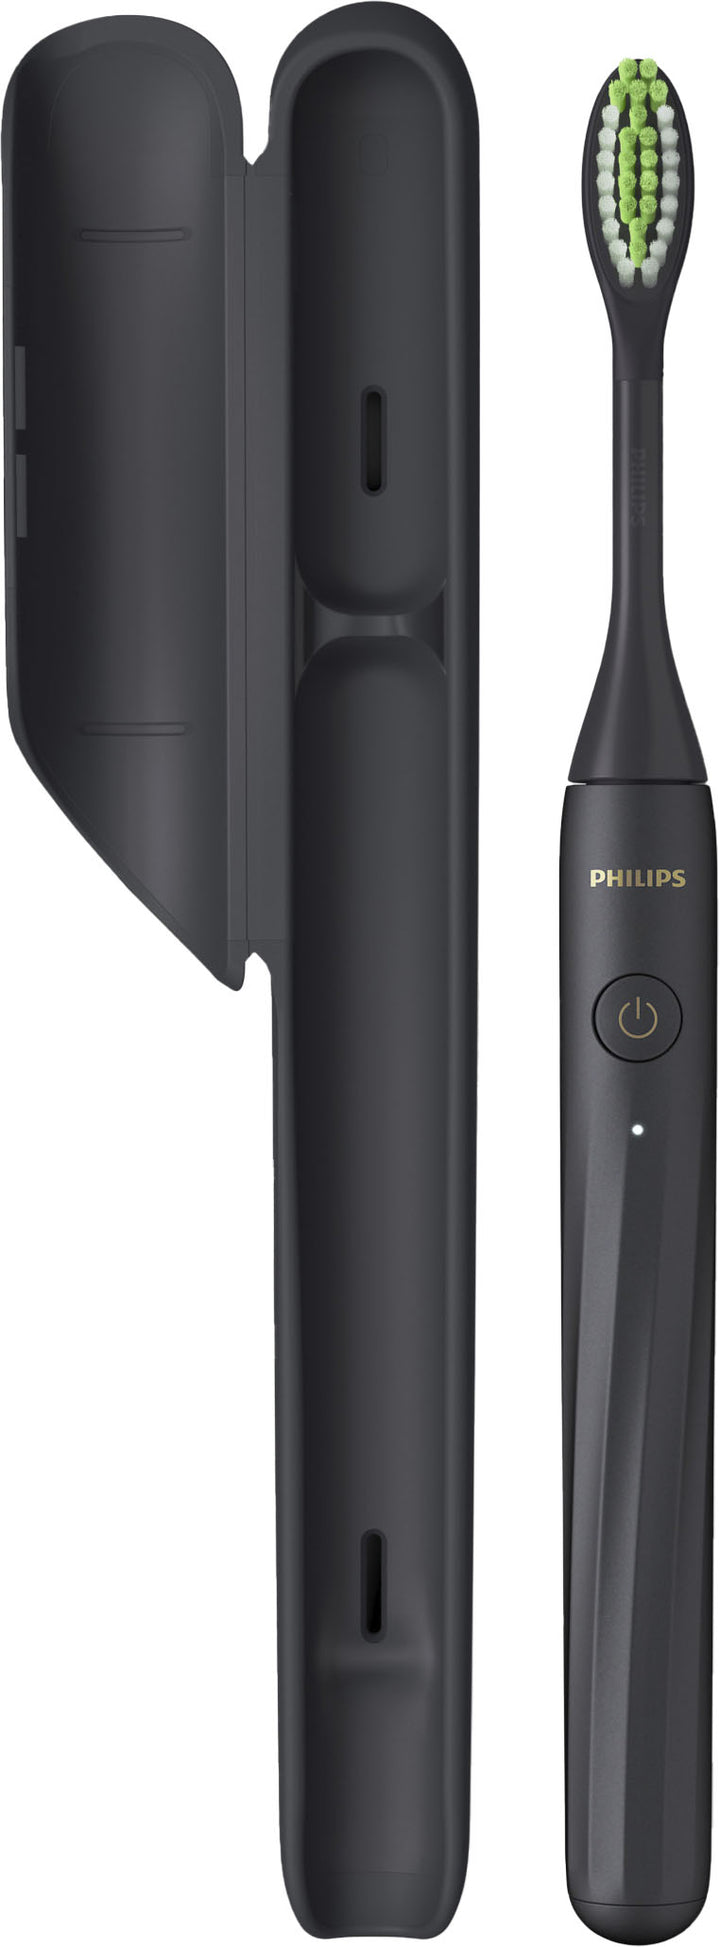 Philips One by Sonicare Rechargeable Toothbrush, Shadow, HY1200/26 - Shadow Black_8